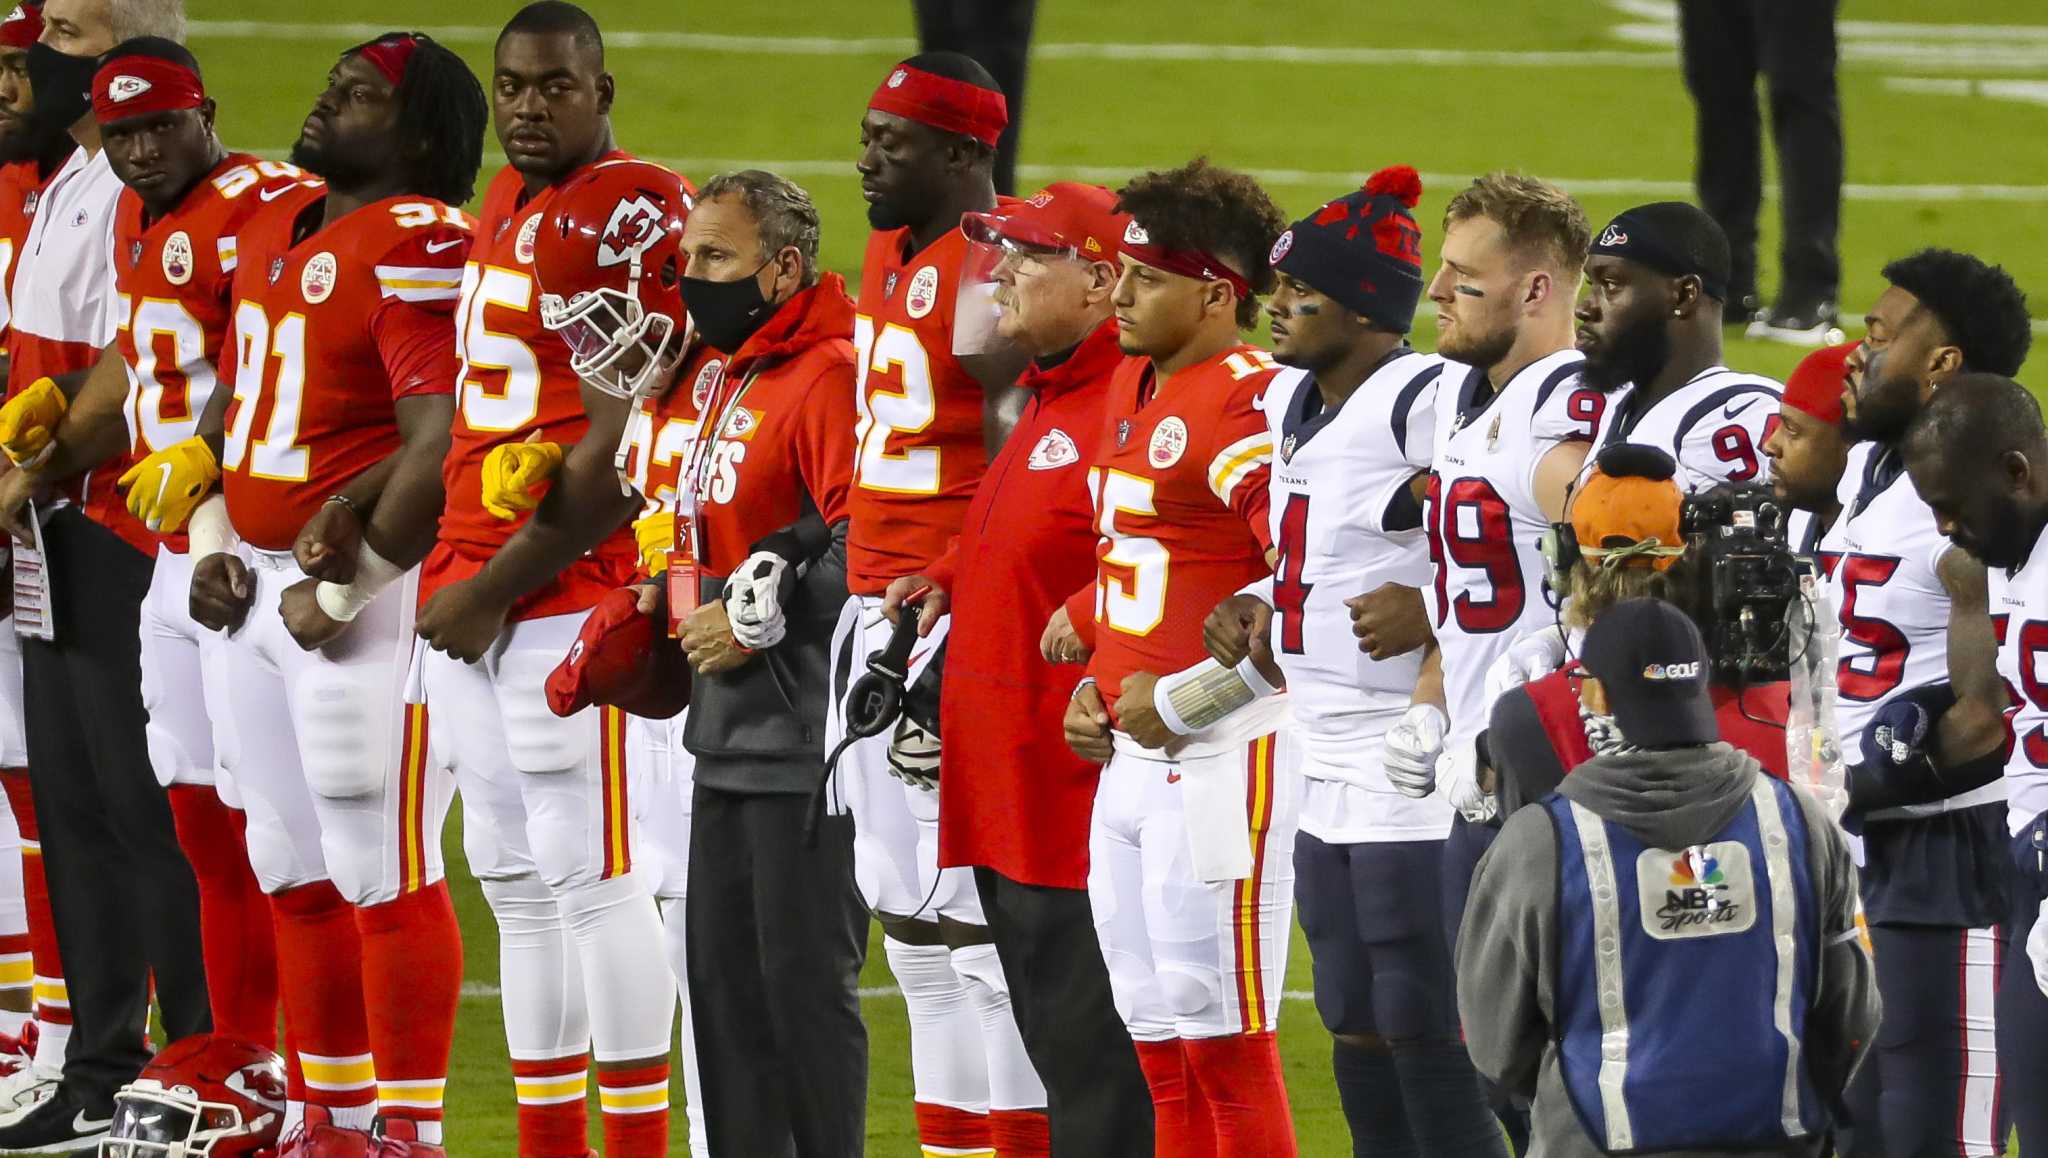 Opinion: Kansas City fans told on themselves by booing NFL's moment of unity  - Houston Chronicle